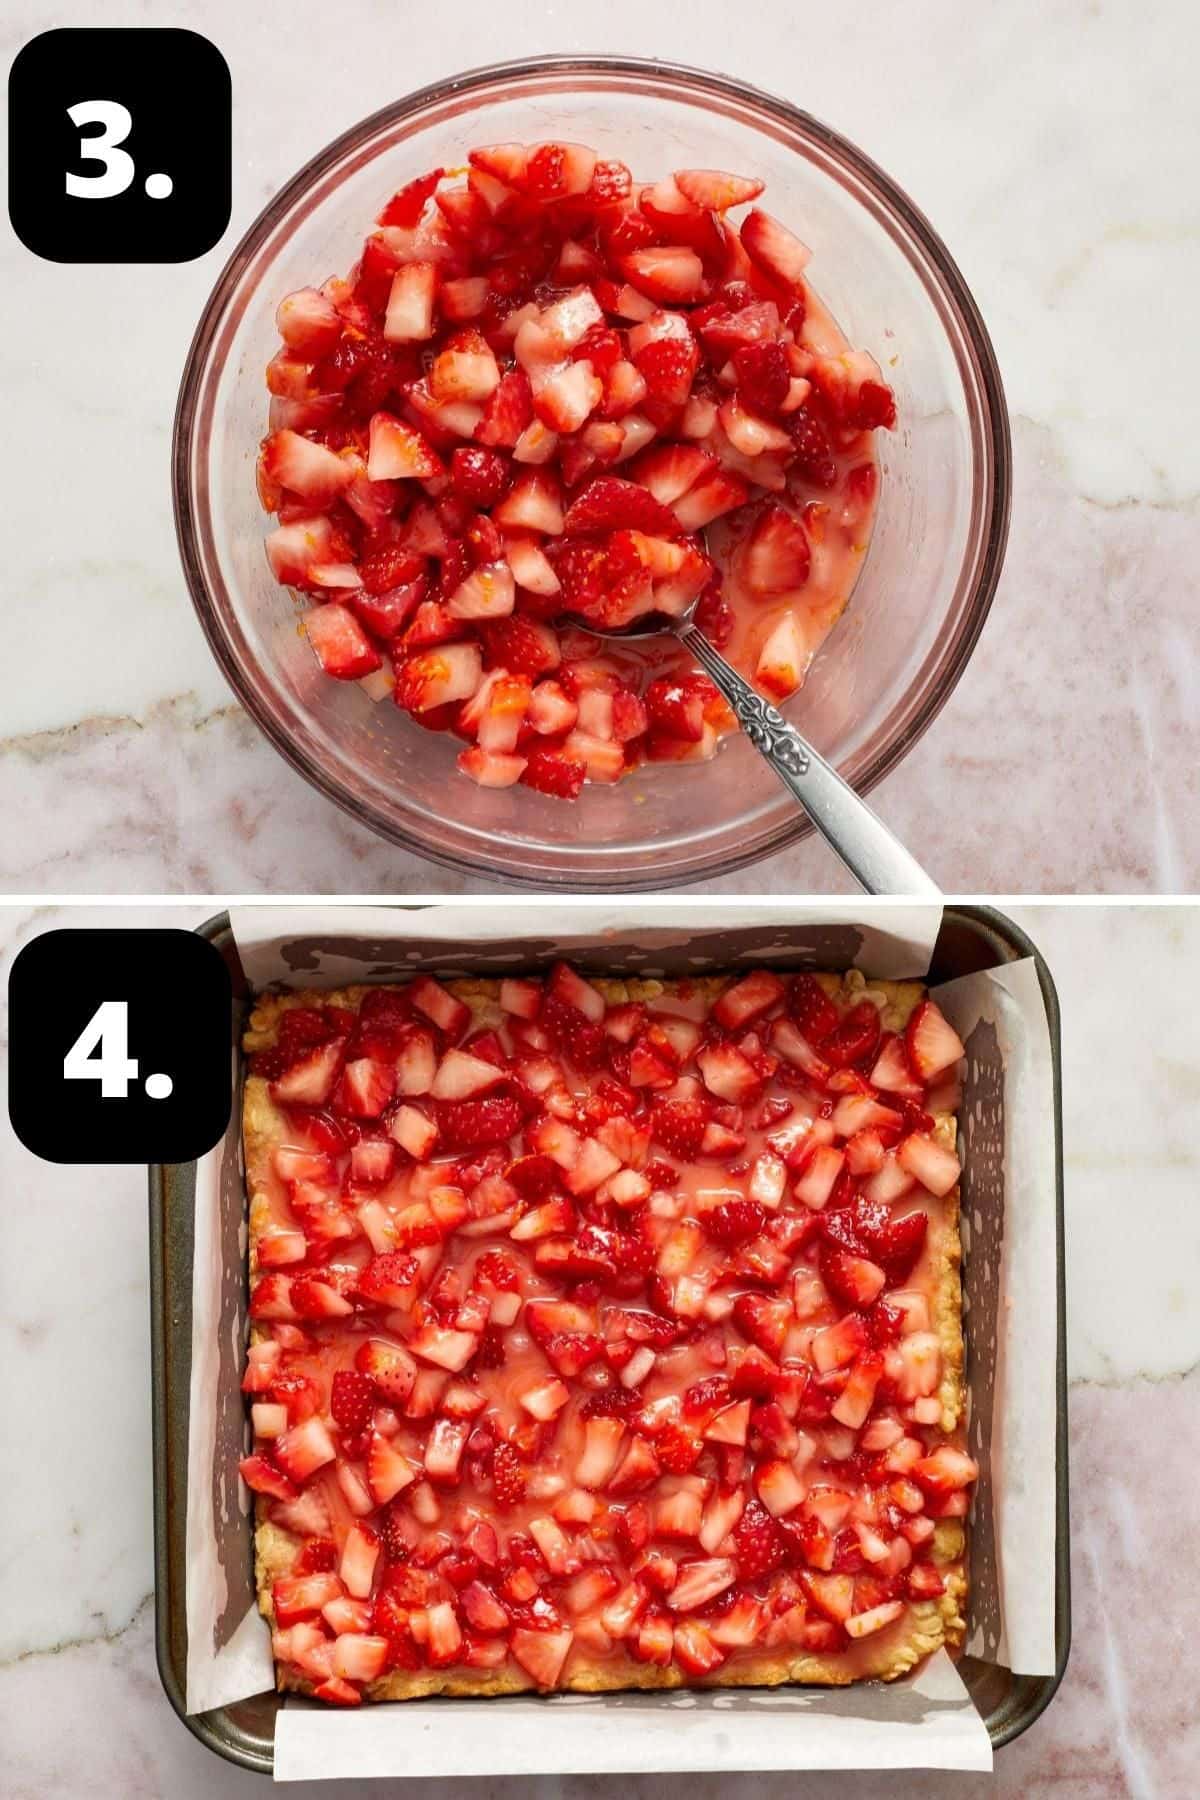 Steps 3-4 of preparing this recipe: the cut strawberries in a glass bowl and the strawberry mixture on top of the cooked base.